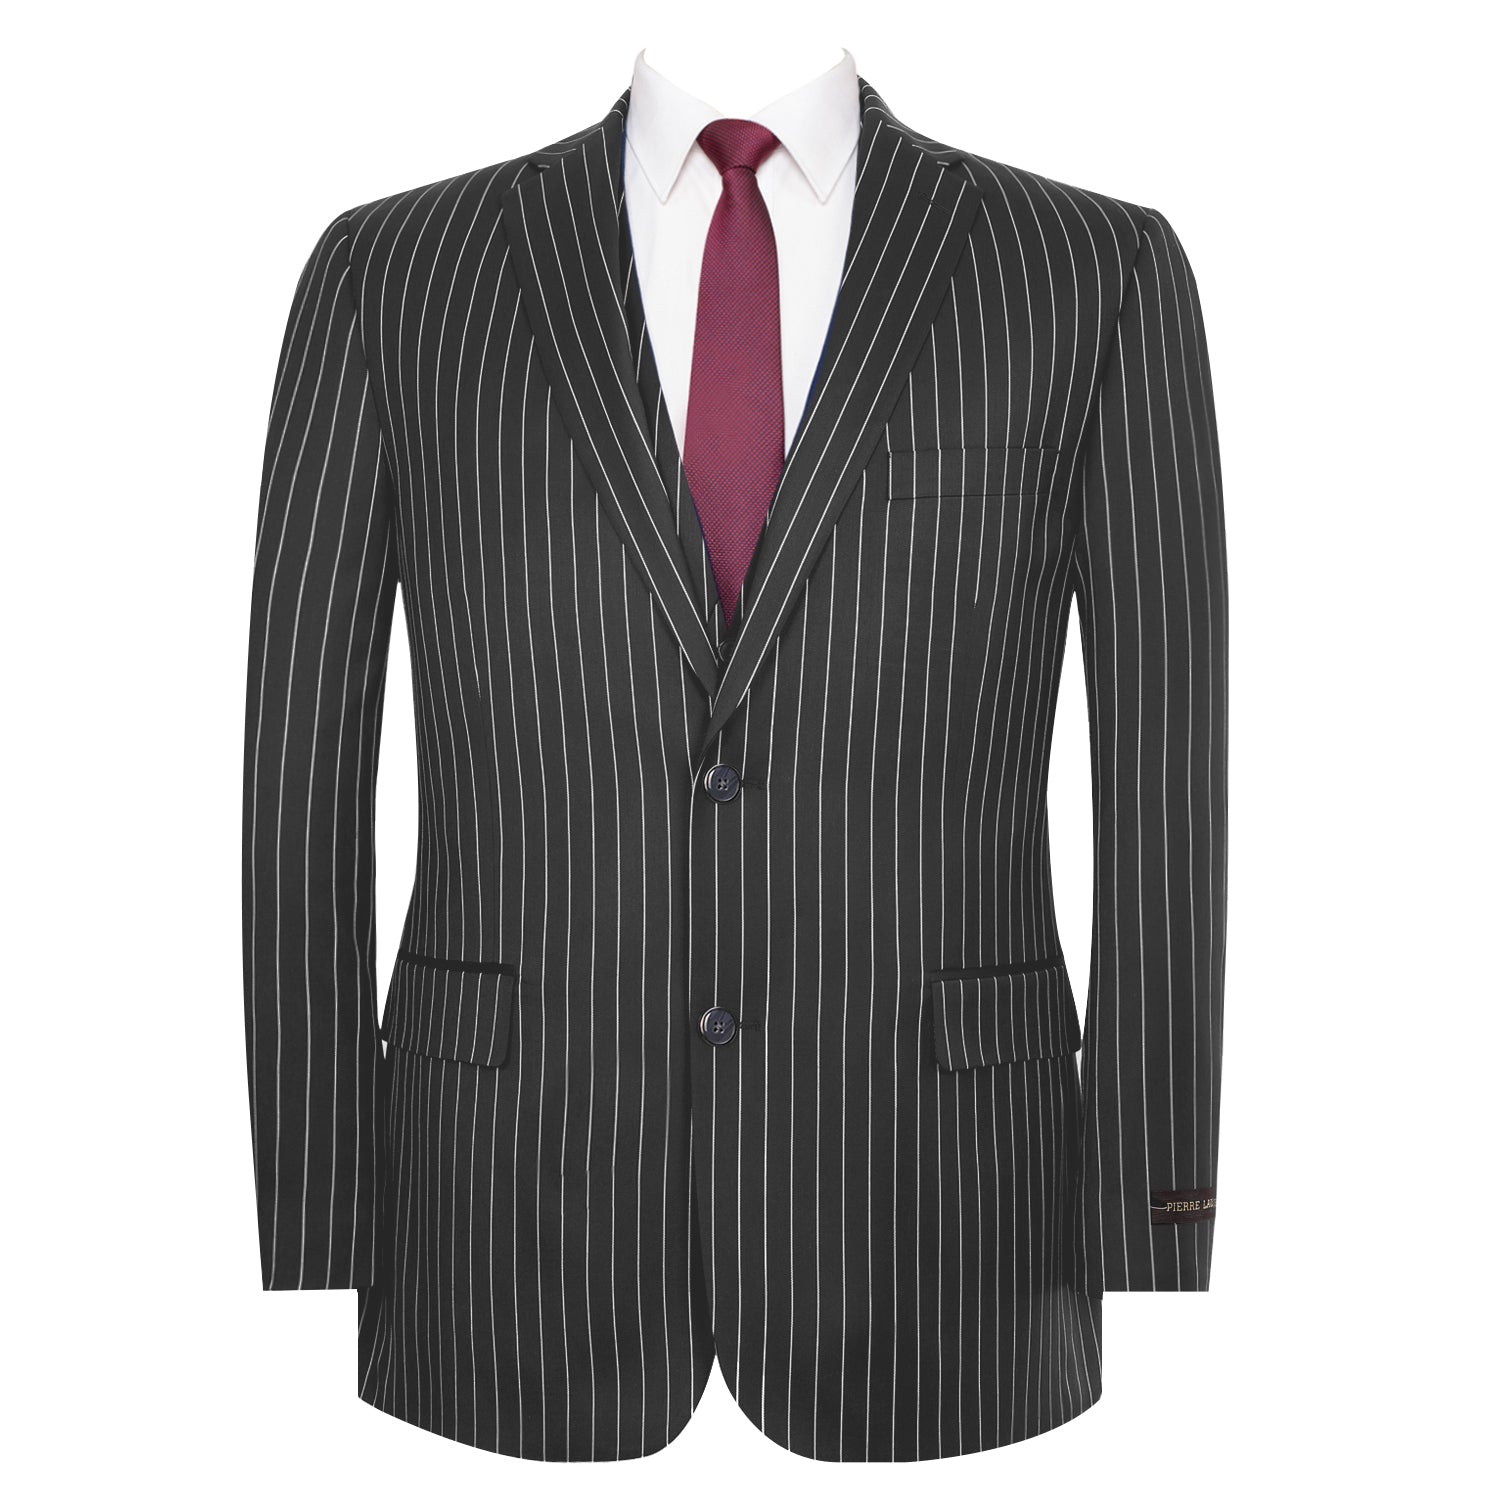 Men's Pinstripe Single Breasted 3-Piece Classic Fit Vested Suit